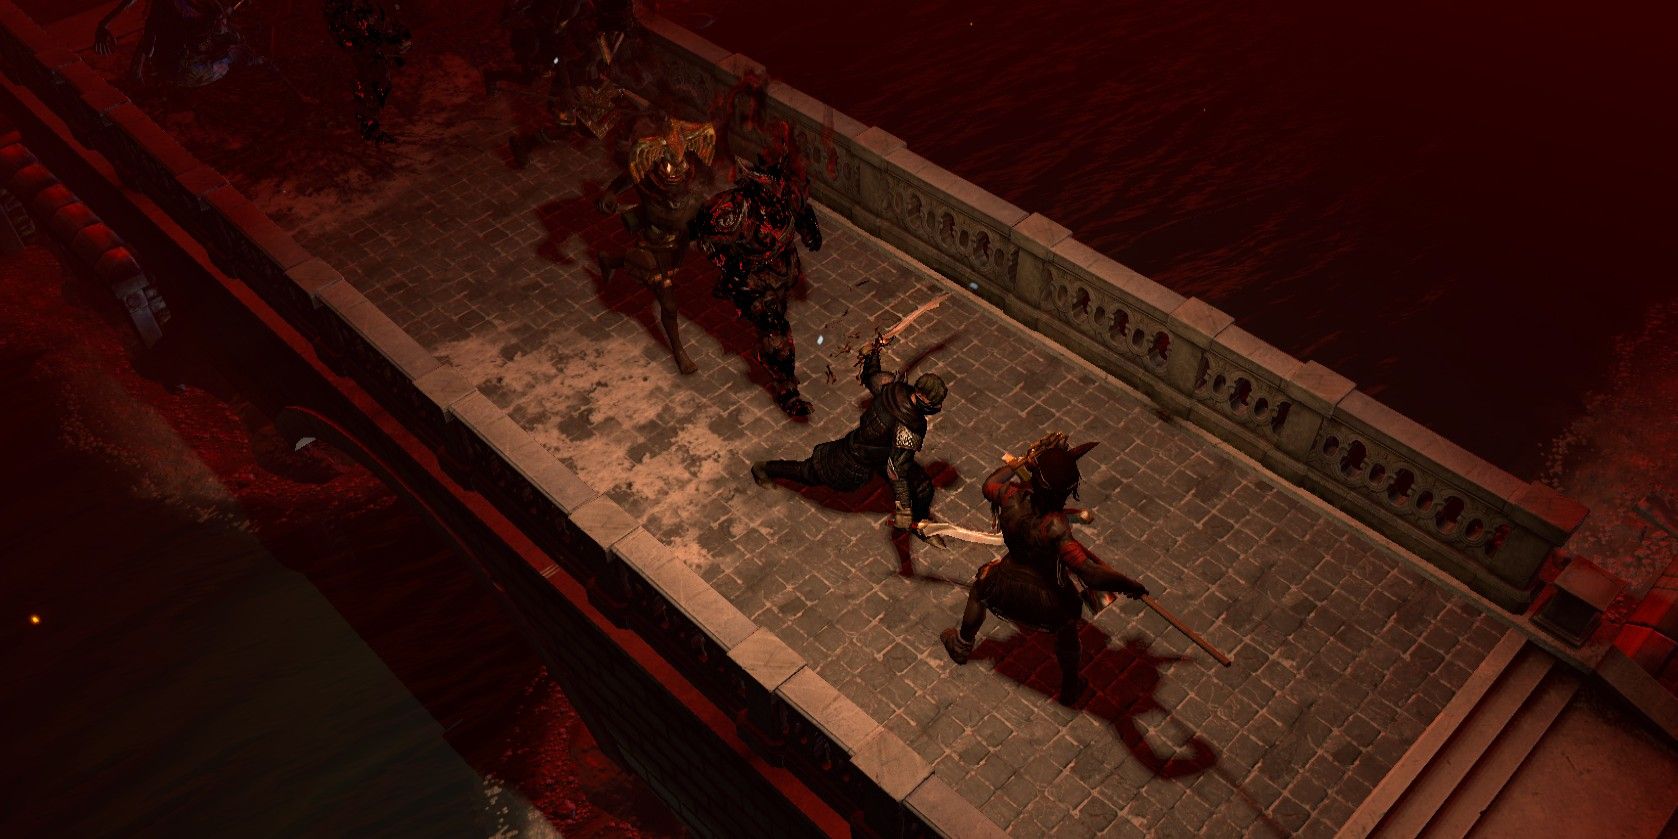 A screenshot shows gameplay in Path of Exile